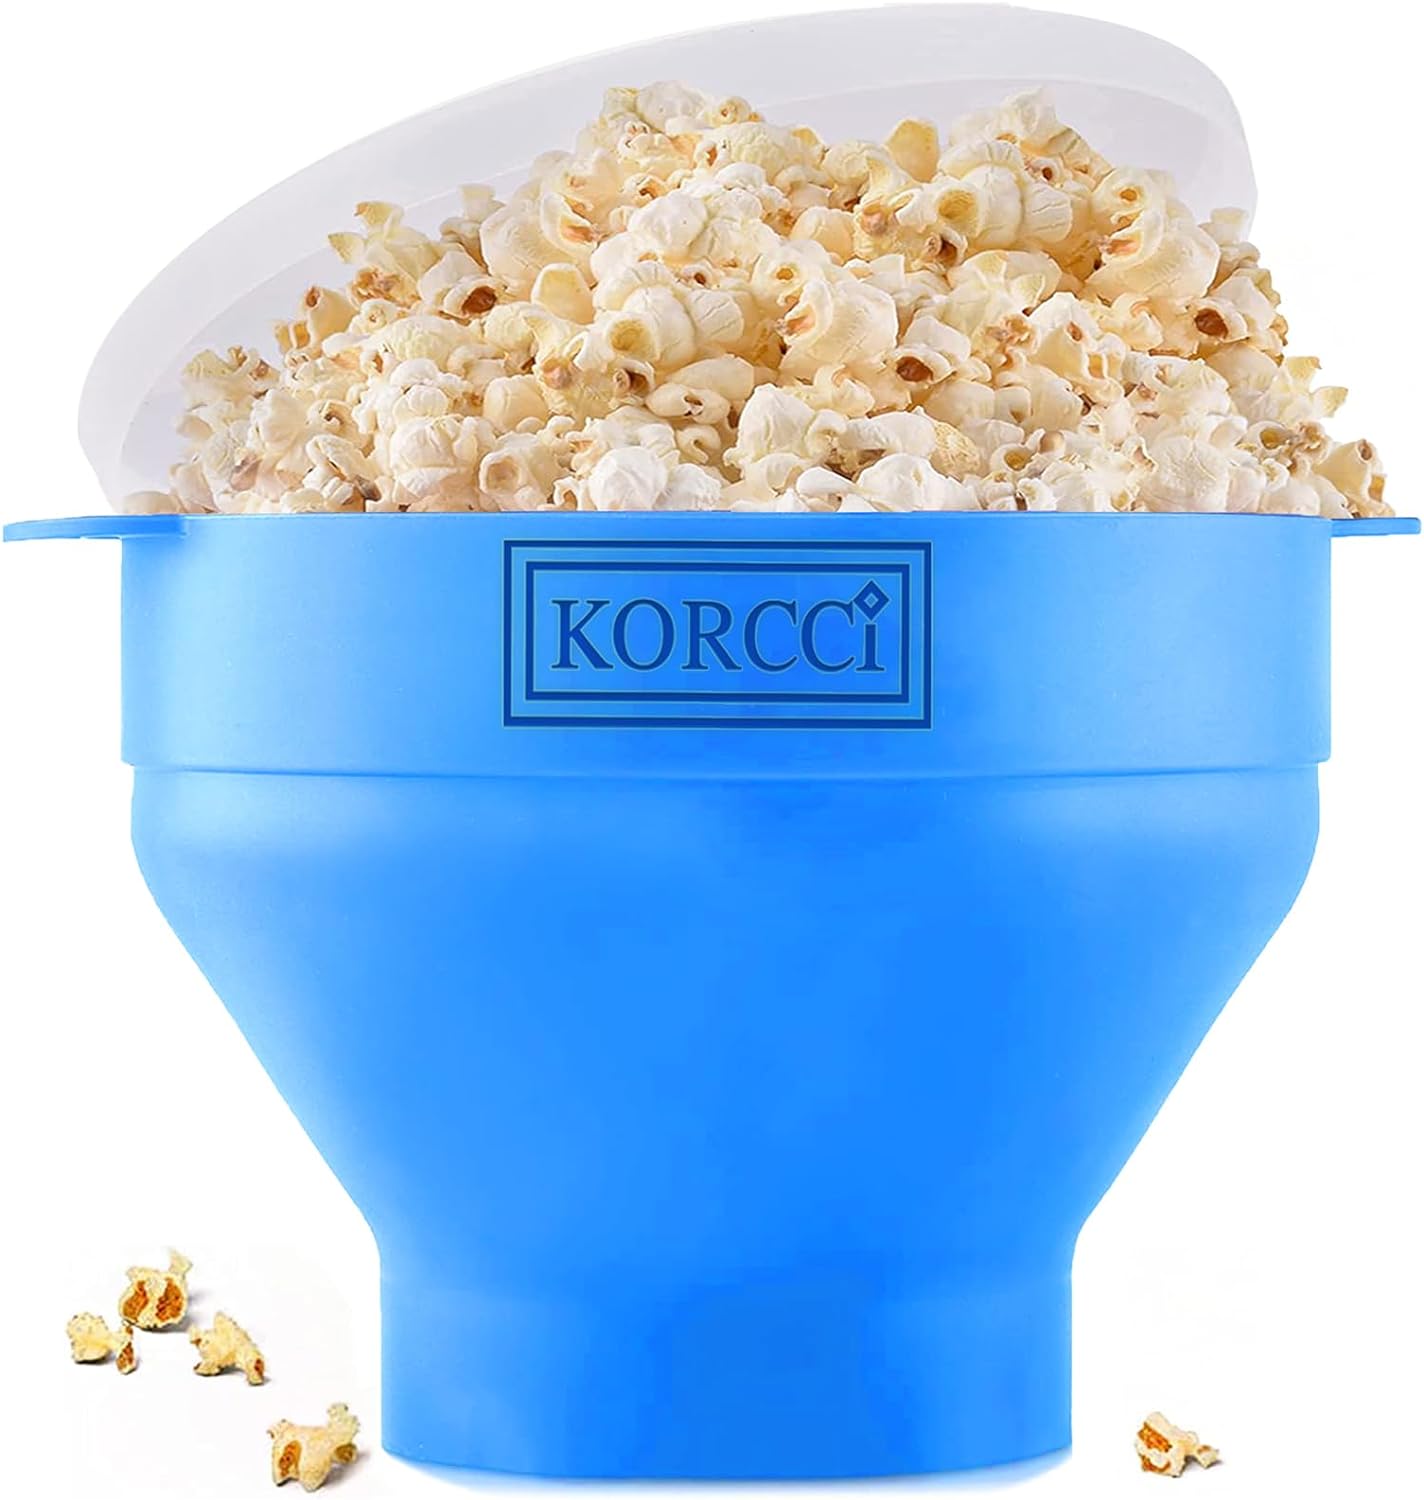 I saw this popper on a Weight Watchers FB page. People were saying how good it was. I thought I'd give it a shot. WOW! It is great! You can make popcorn in the microwave with no oil at all. It pops almost all of the kernels. Easy to use and easy to clean. Collapses for easy storage.